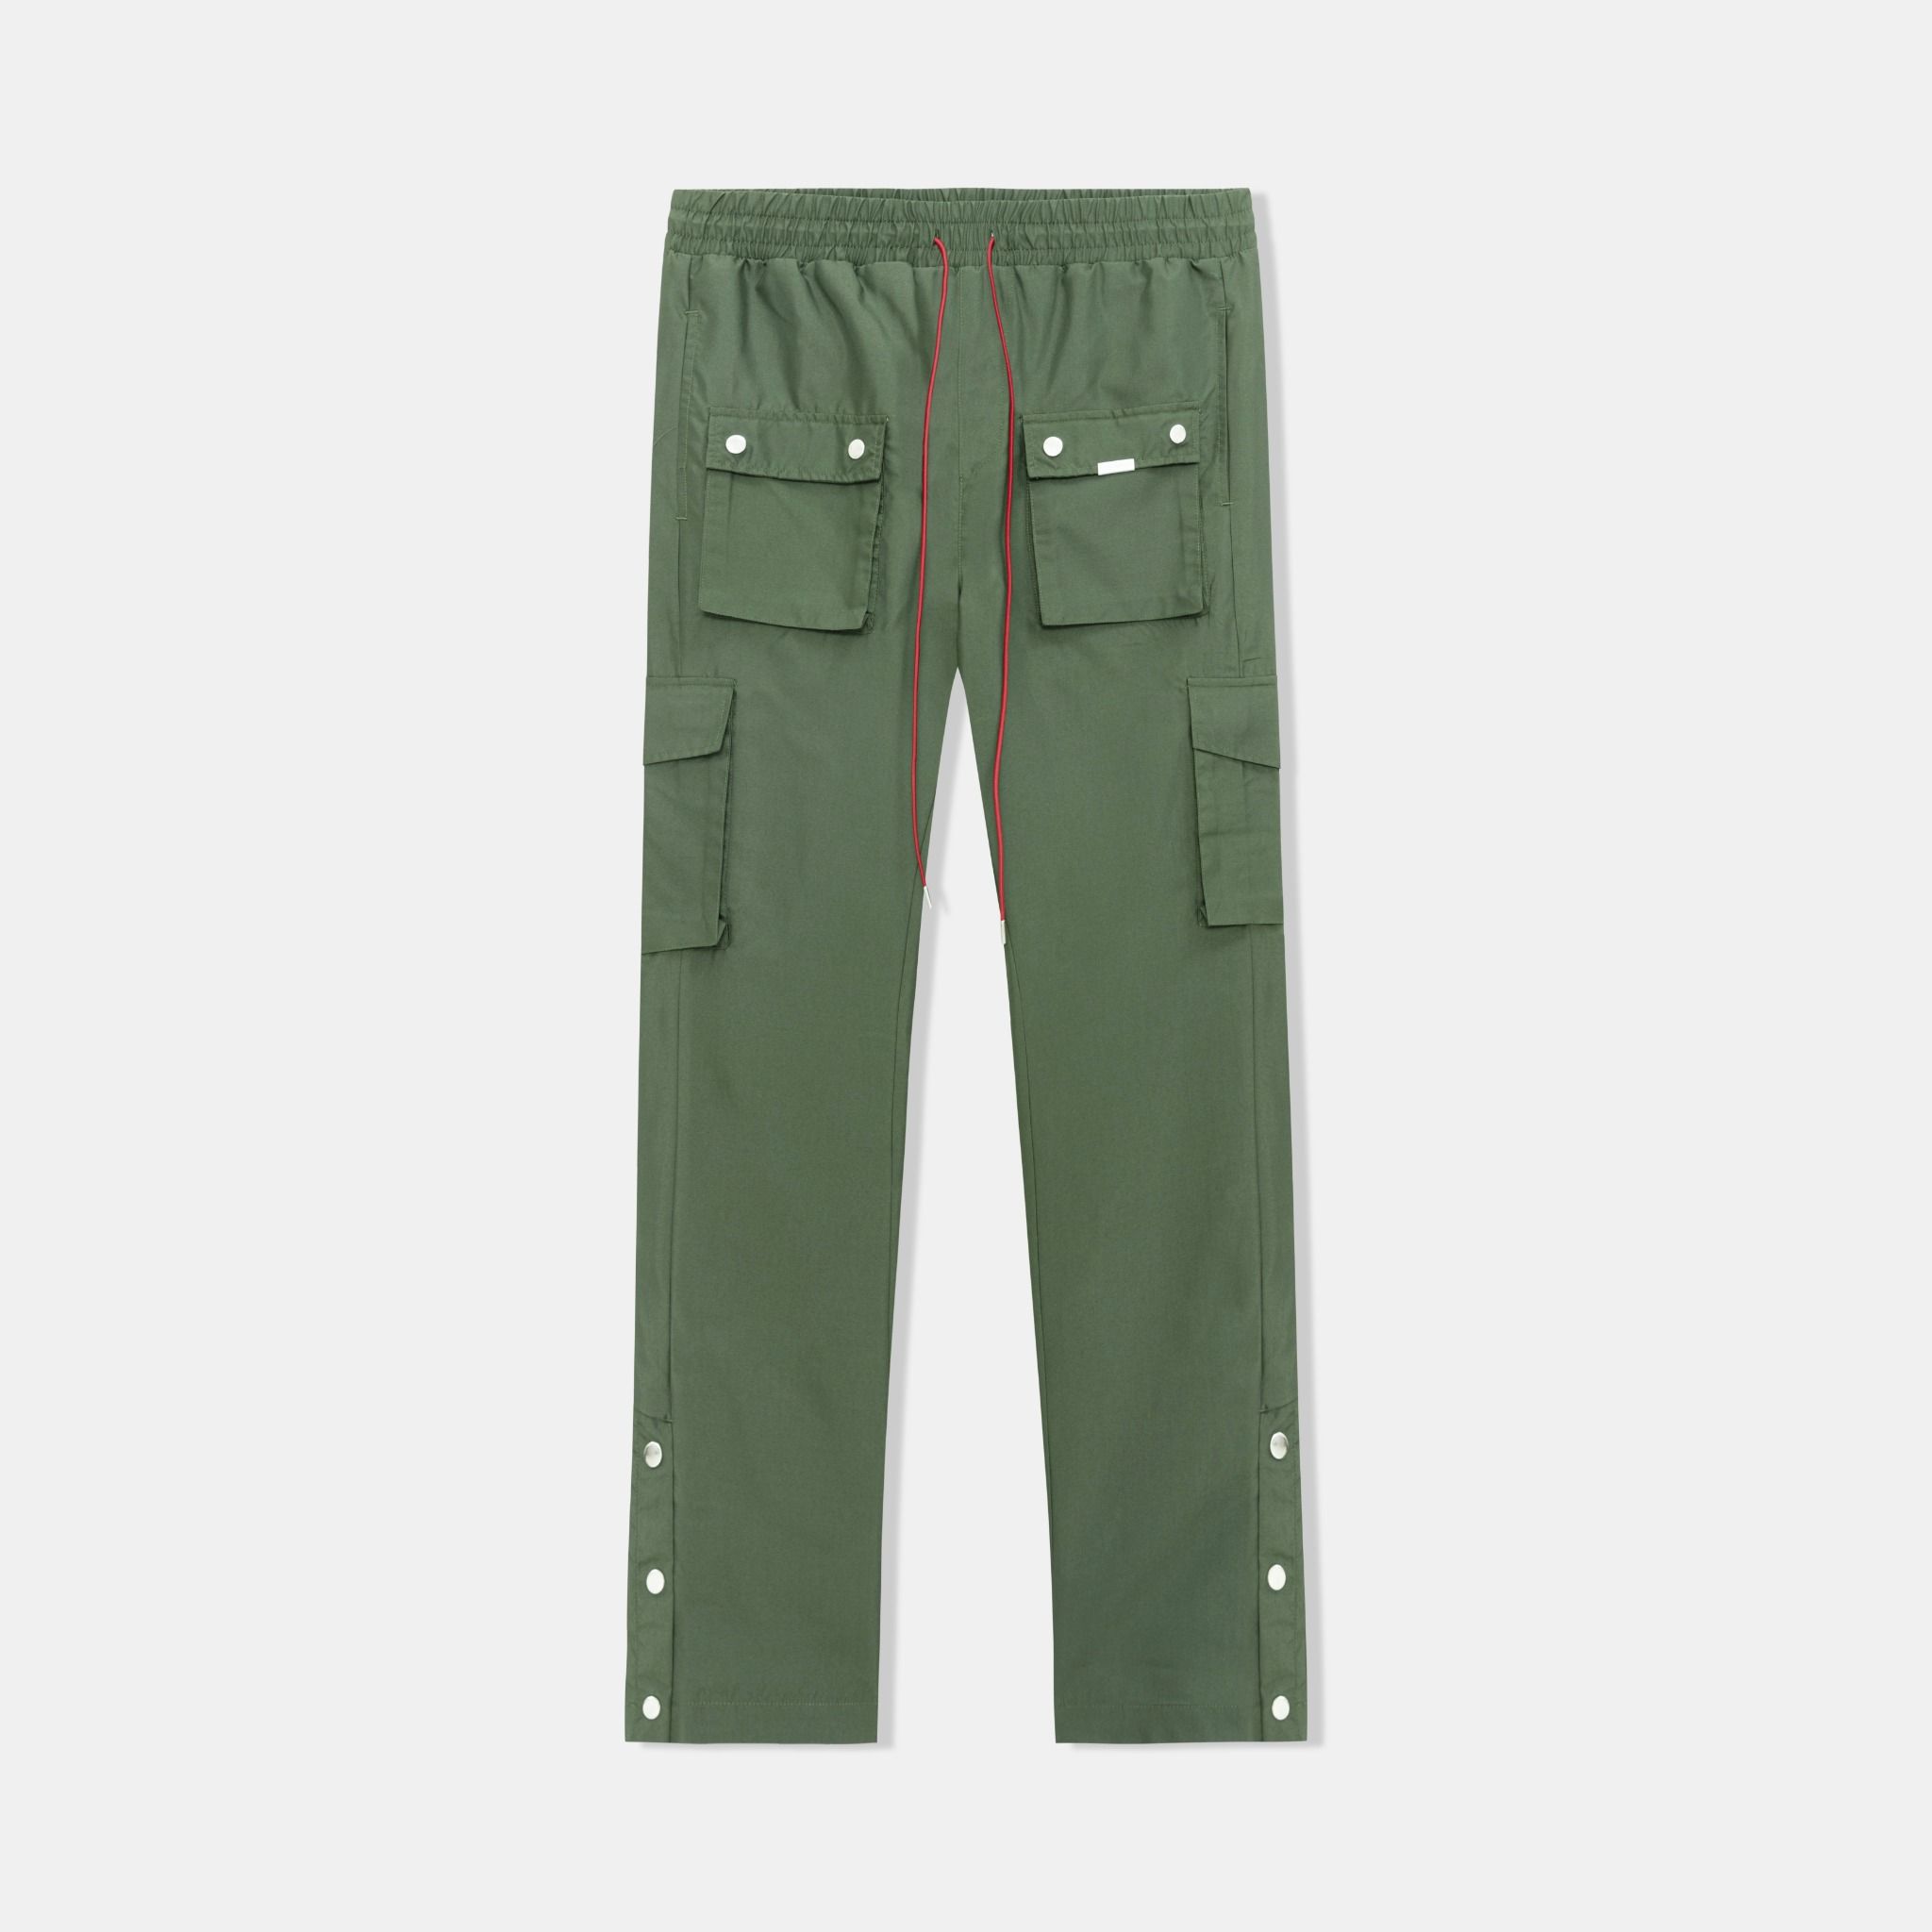  JGD6 - FNOS SNAP CARGO PANTS - OLIVE GREEN 